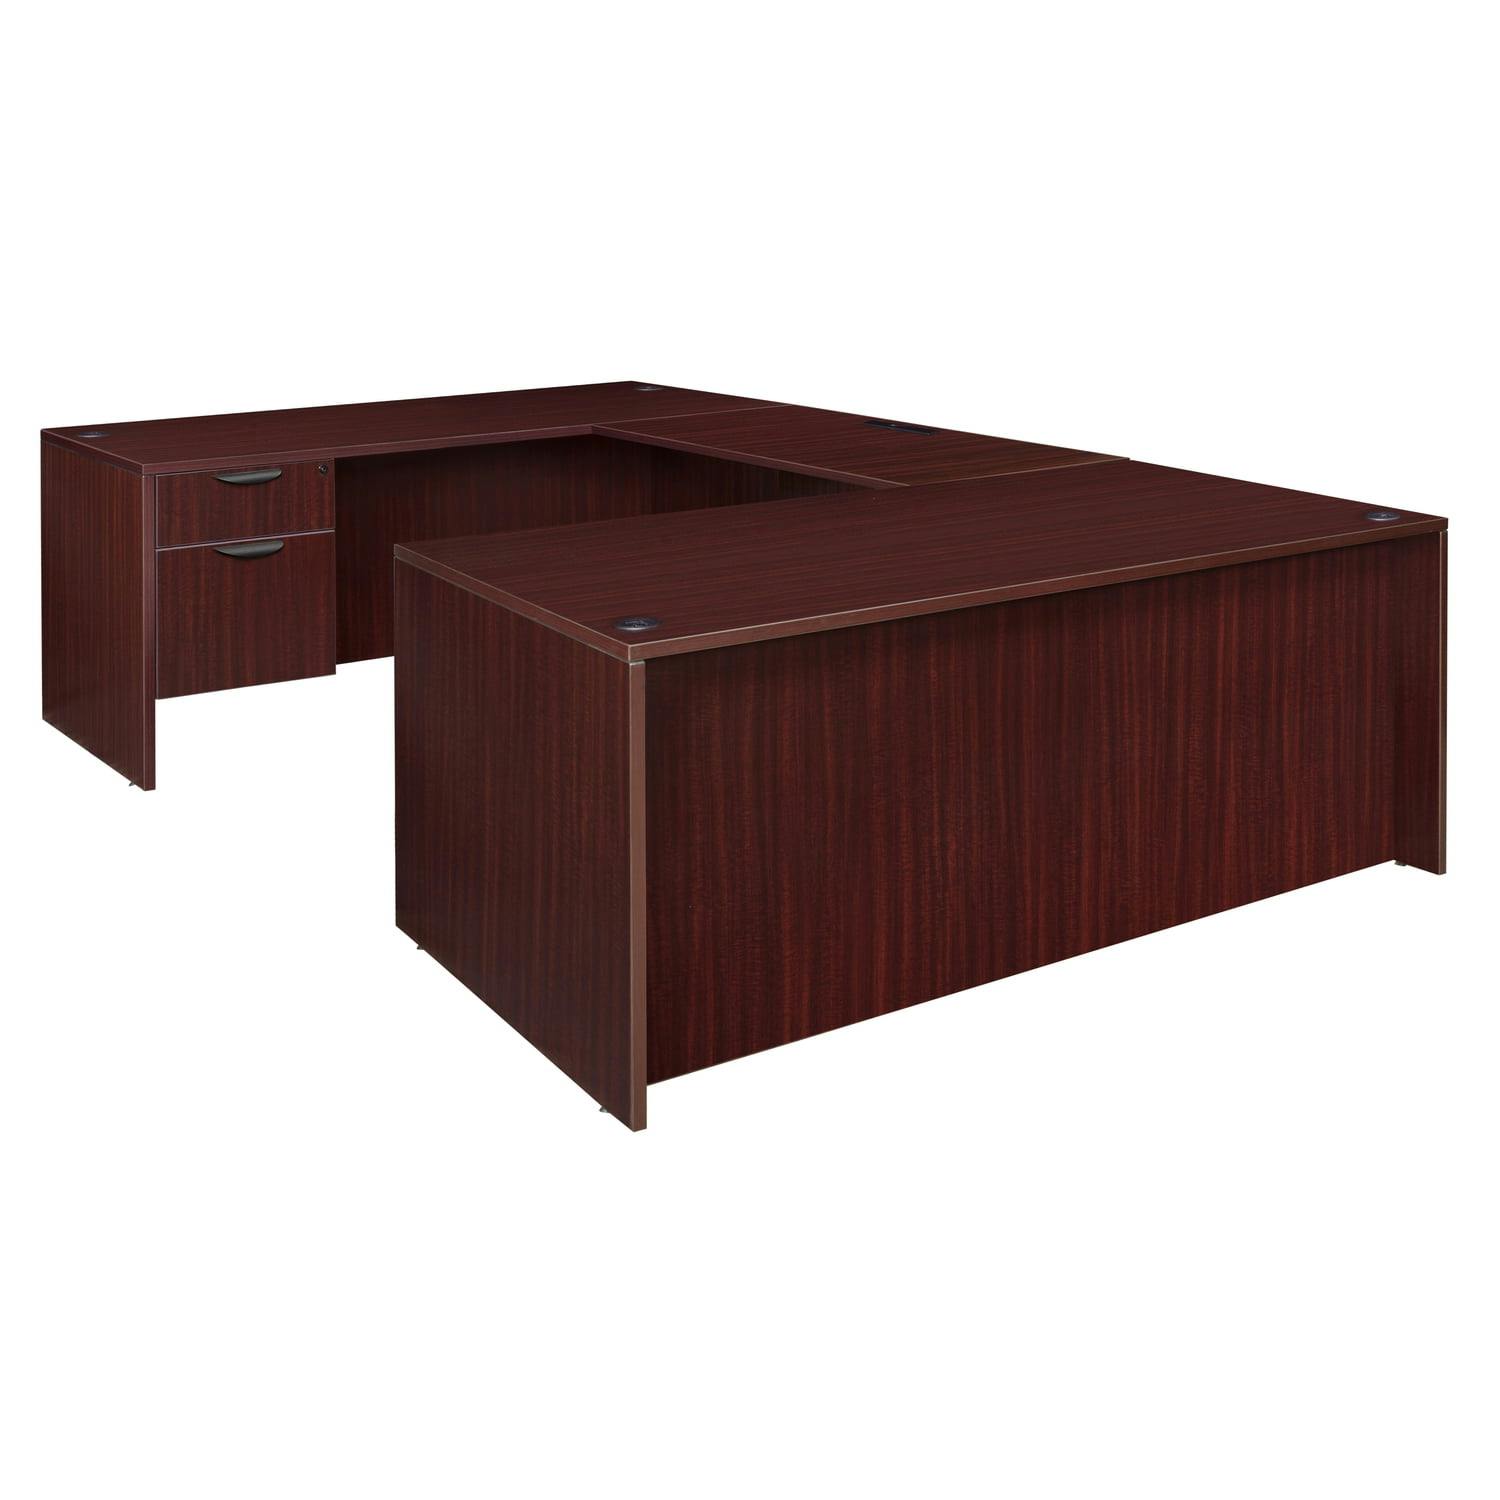 Executive Mahogany U-Shaped Desk with Drawer and Filing Cabinet